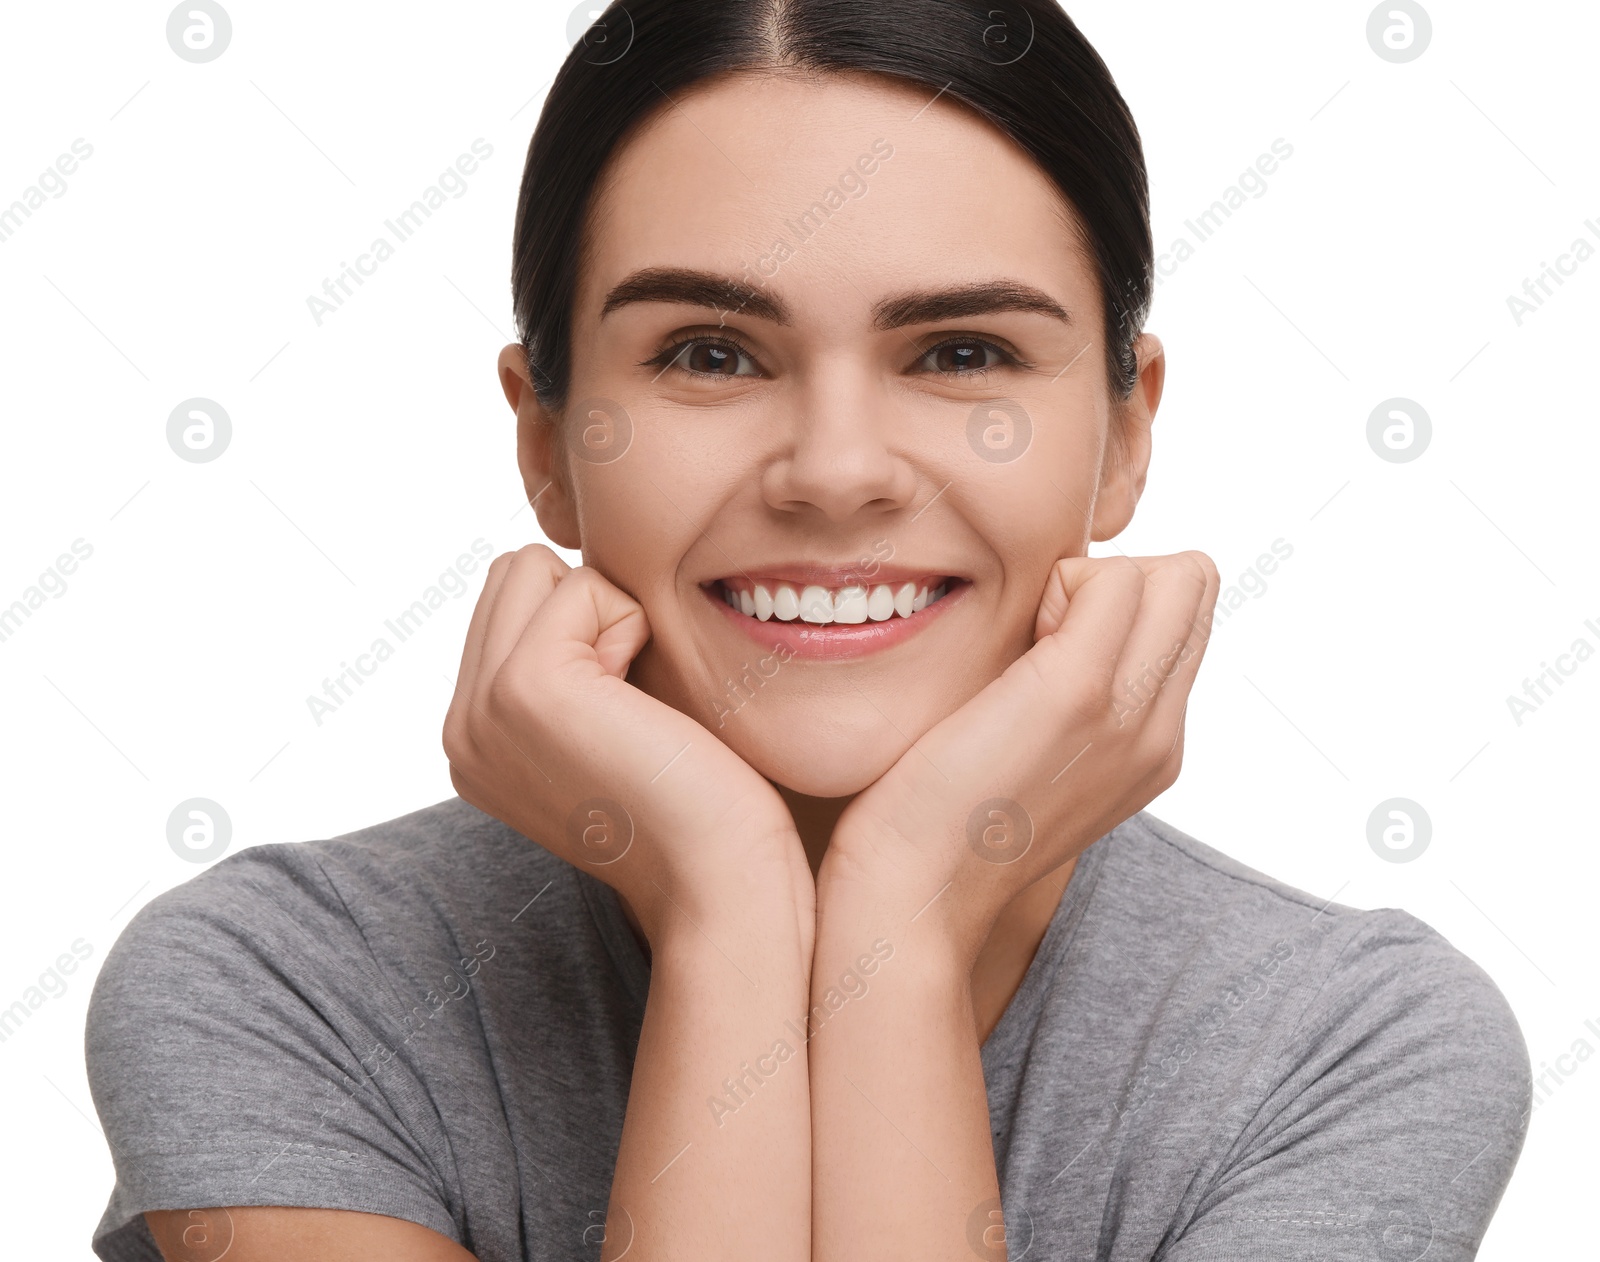 Photo of Young woman with clean teeth smiling on white background